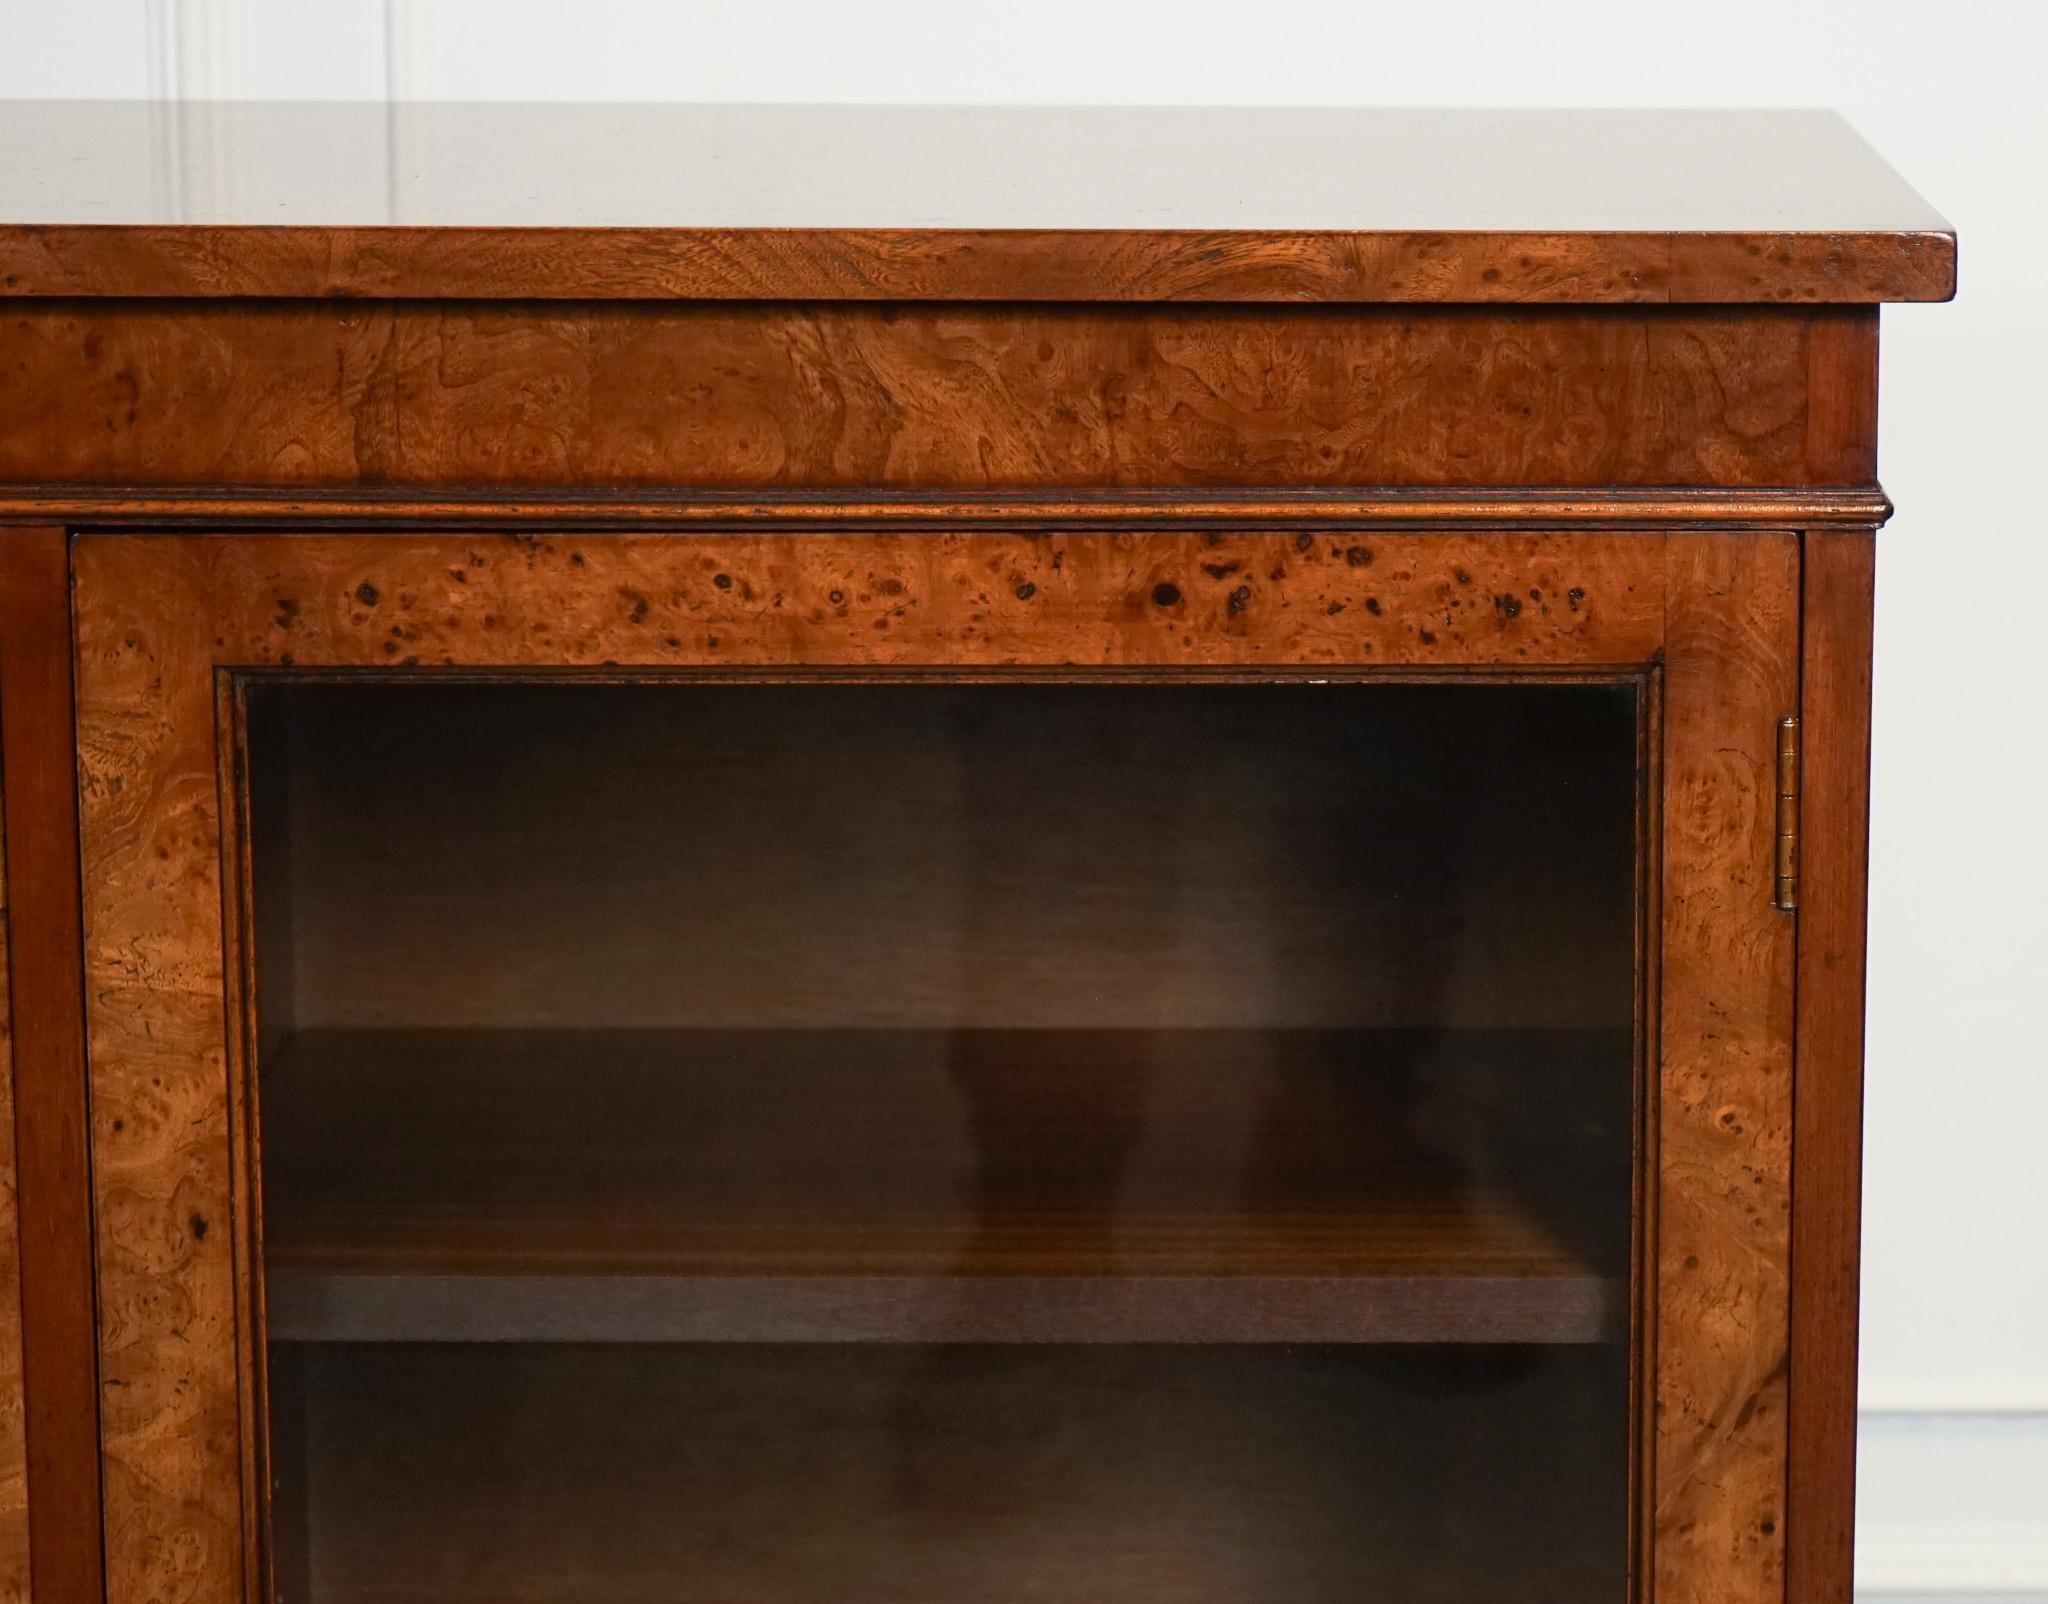 GORGEOUS BURR WALNUT GLAZED BOOKCASE DISPLAY CABiNET In Good Condition For Sale In Pulborough, GB